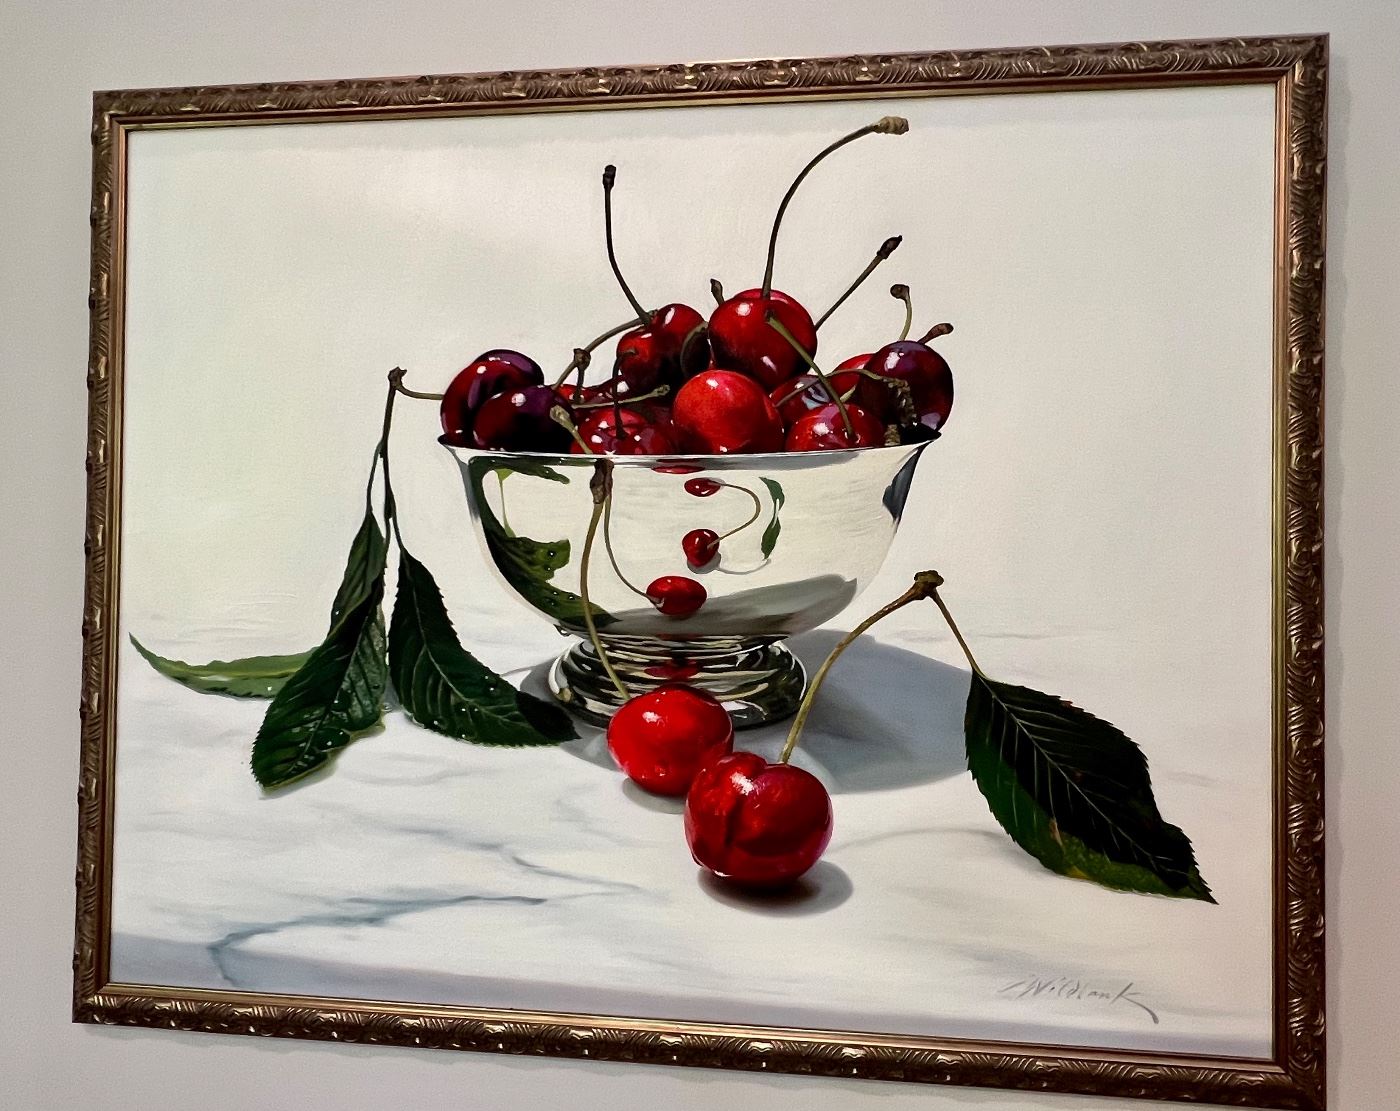 51. Painting of Bowl of Cherries by Wildbank (57" x 45")